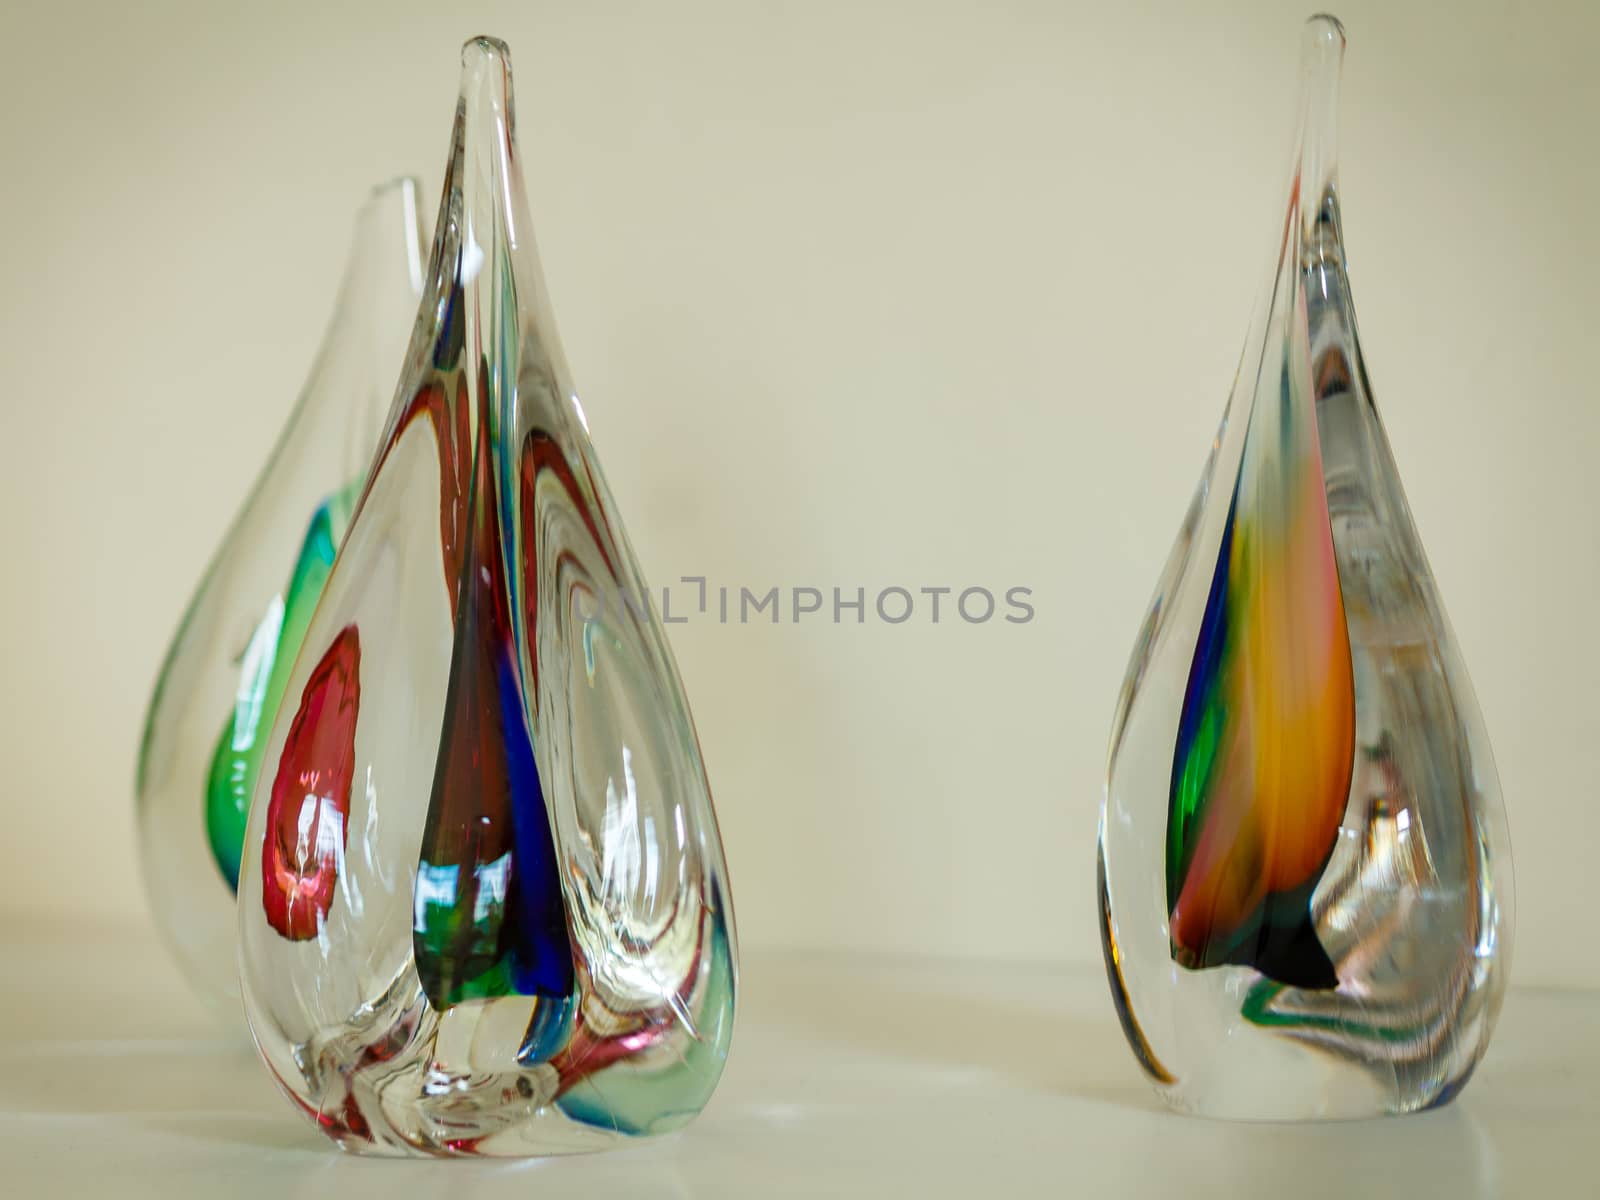 Three glass sculptures with various colors worked into them.